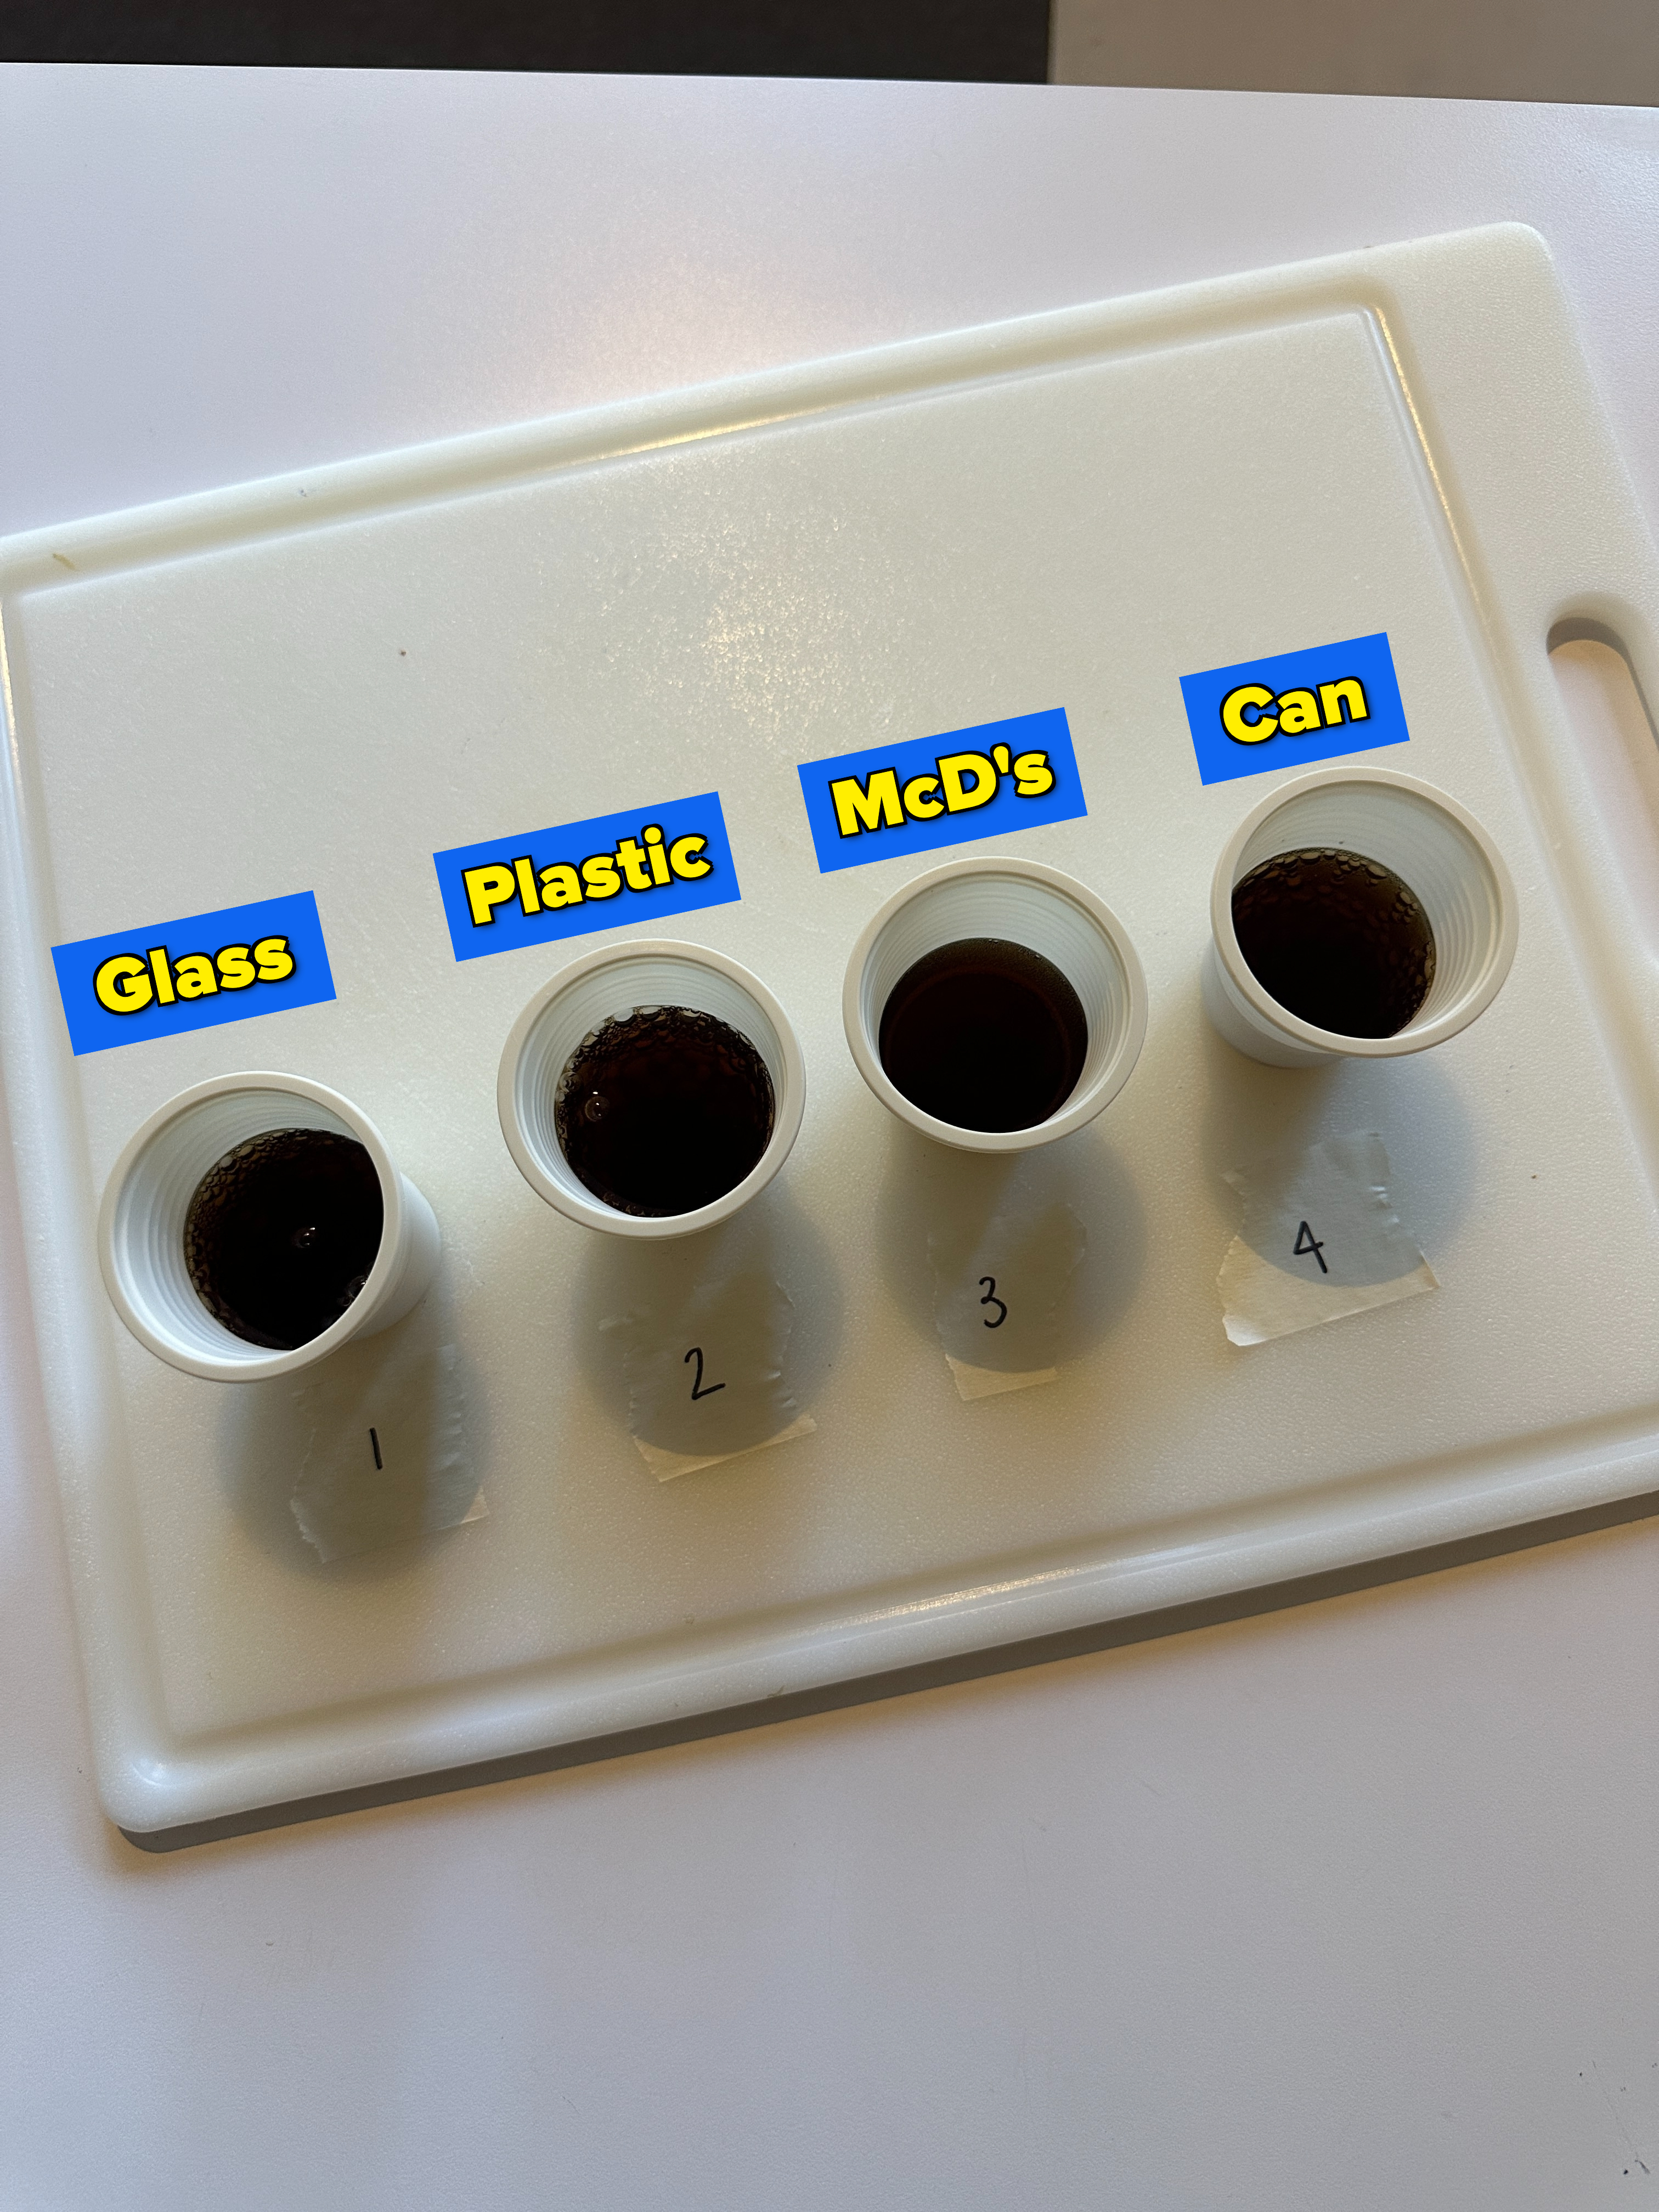 Four mouthwash cups on a cutting board, each filled with Diet Coke from different vessels